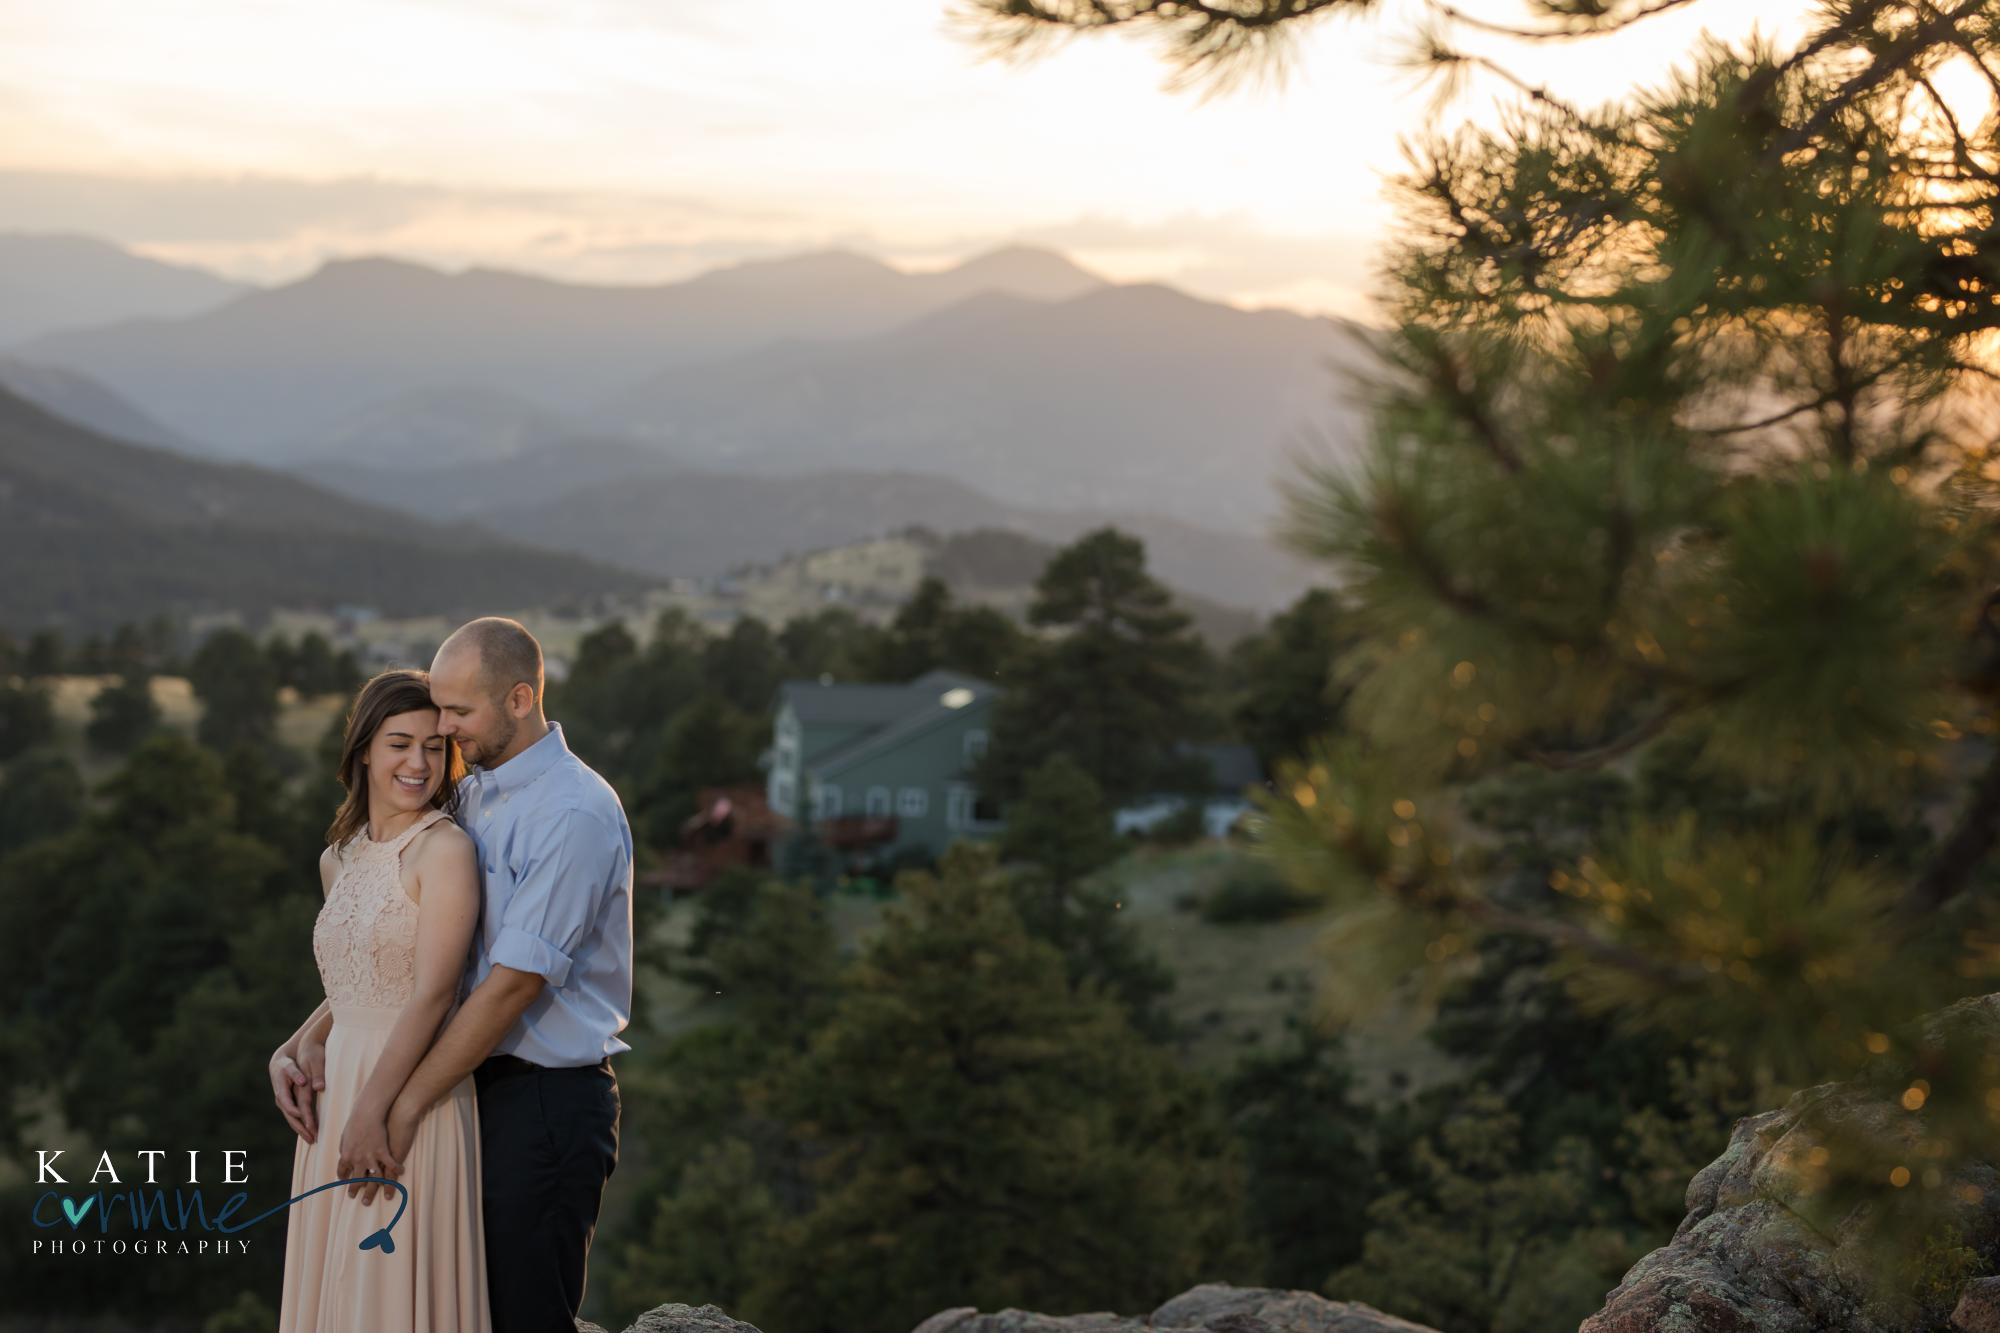 Colorado couple gets photographed during mountain engagement session